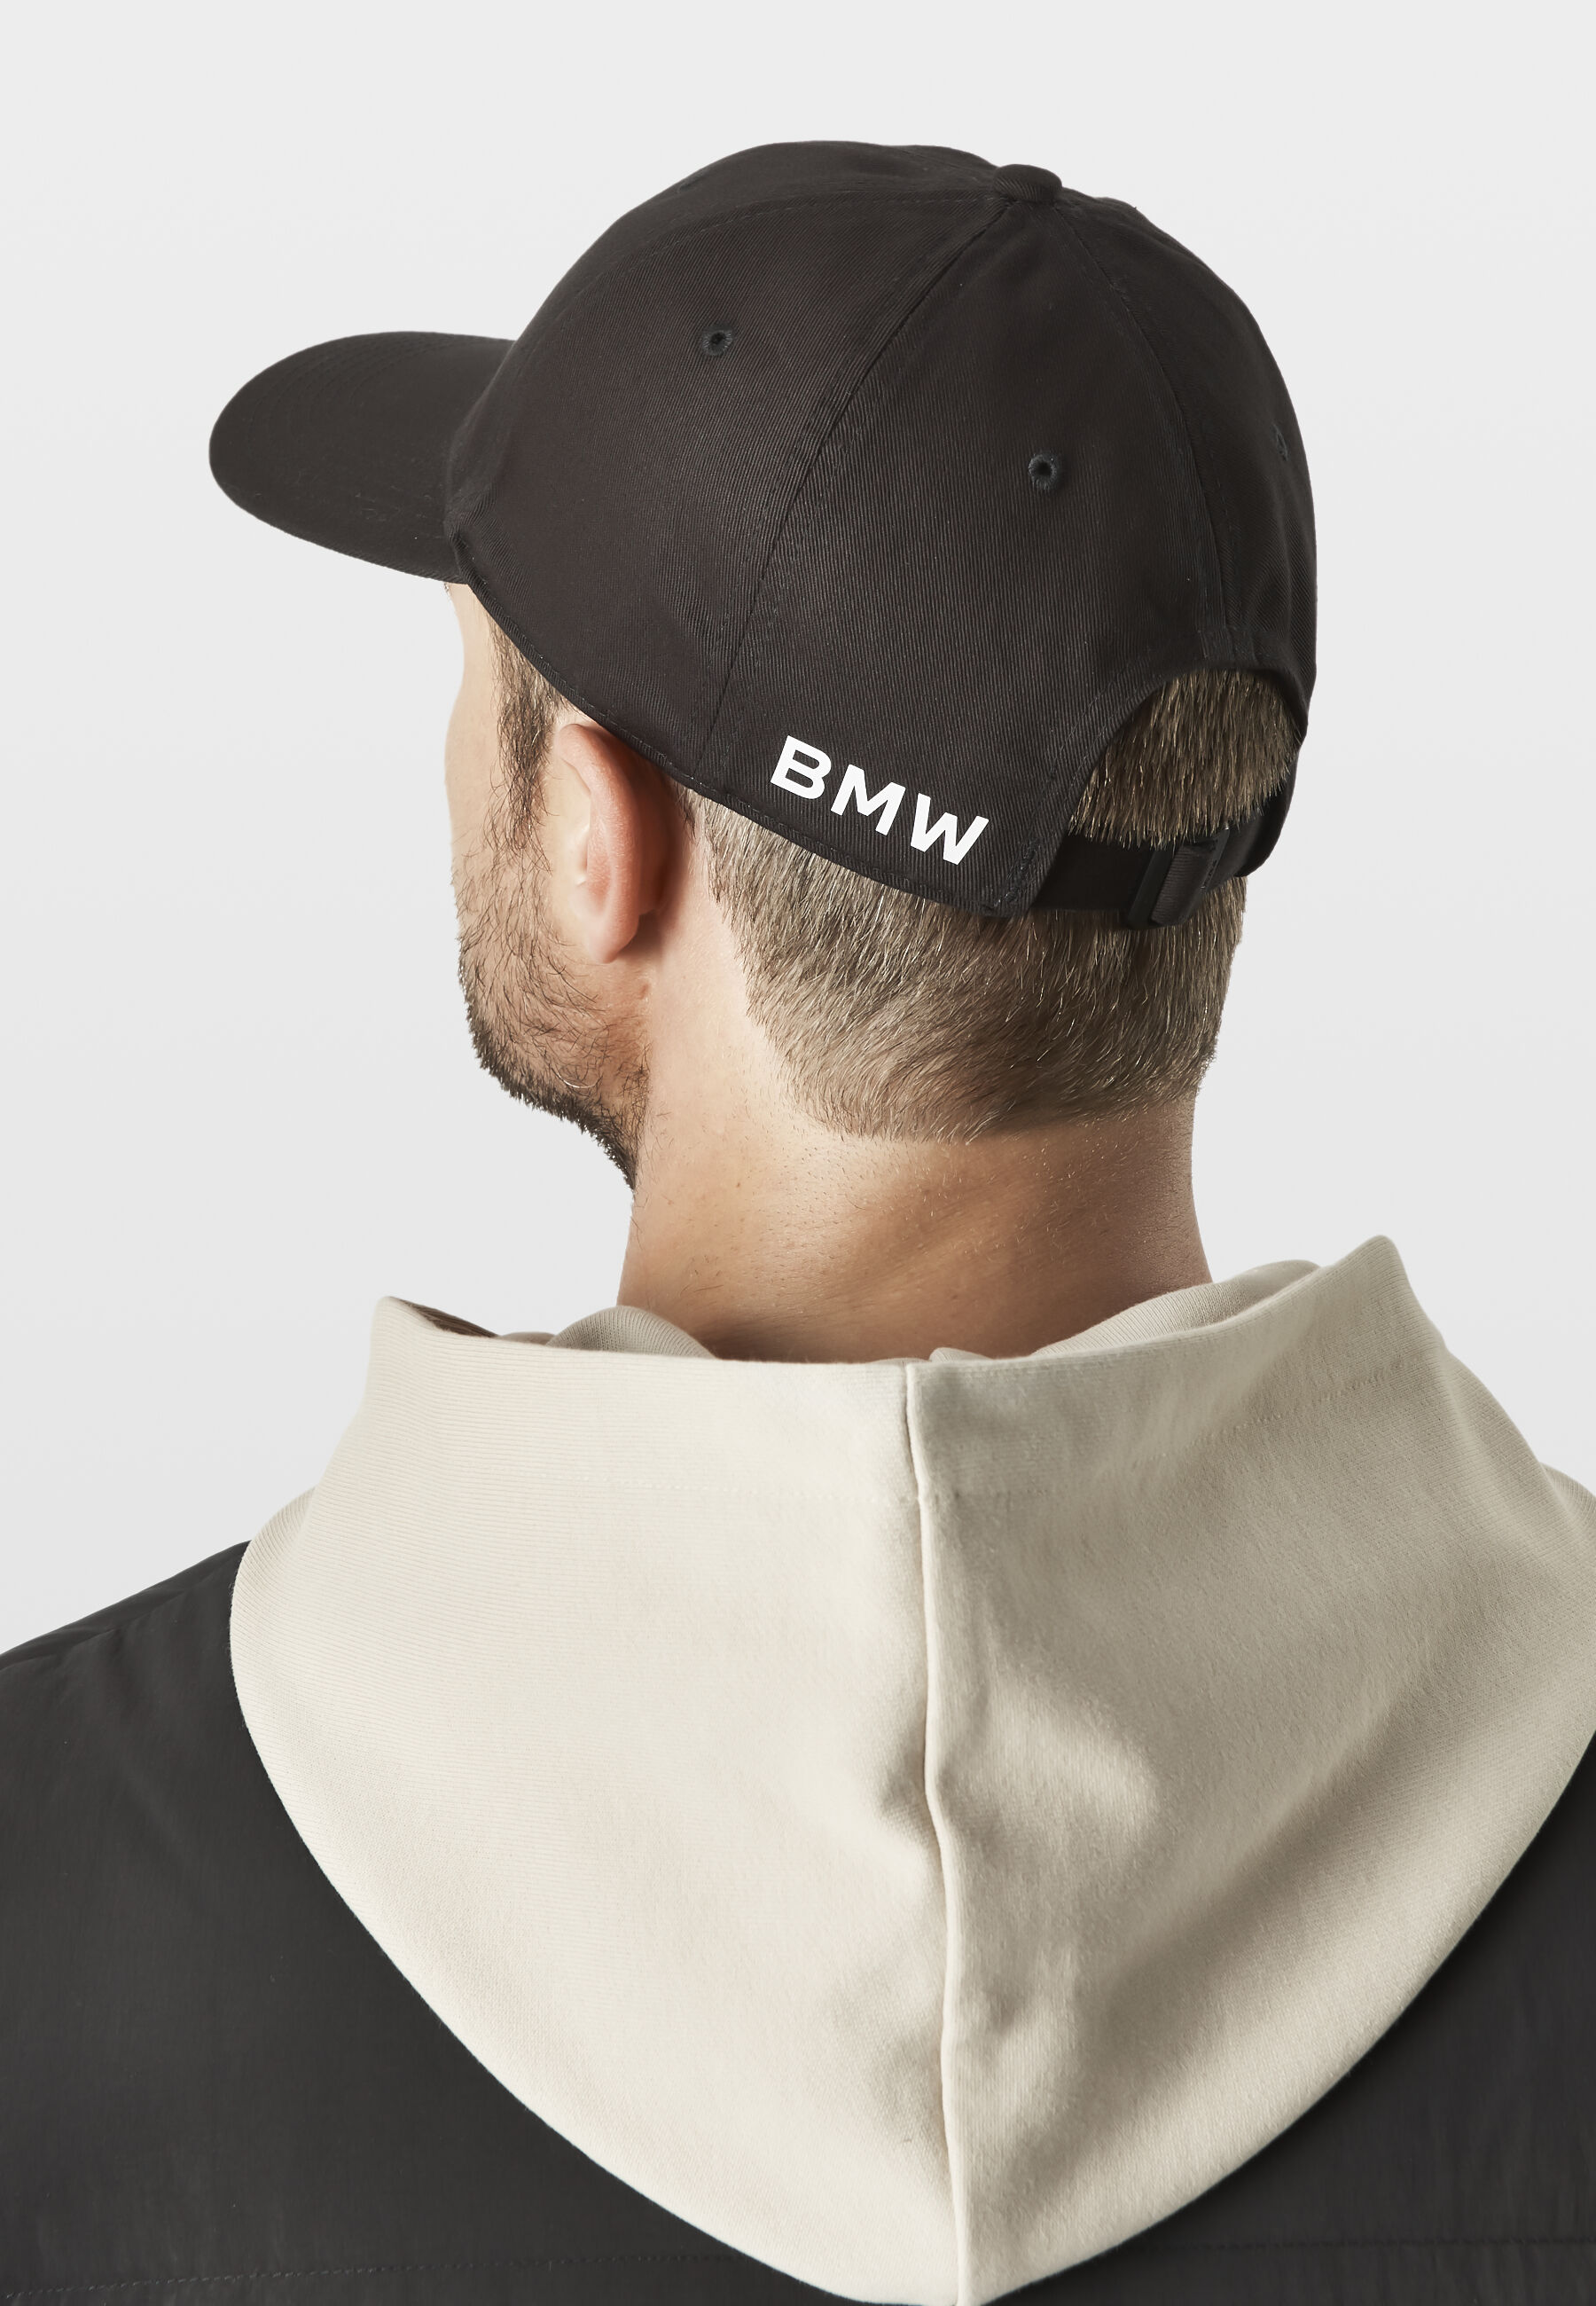 BMW Caps & Beanies | Find your Freude | BMW